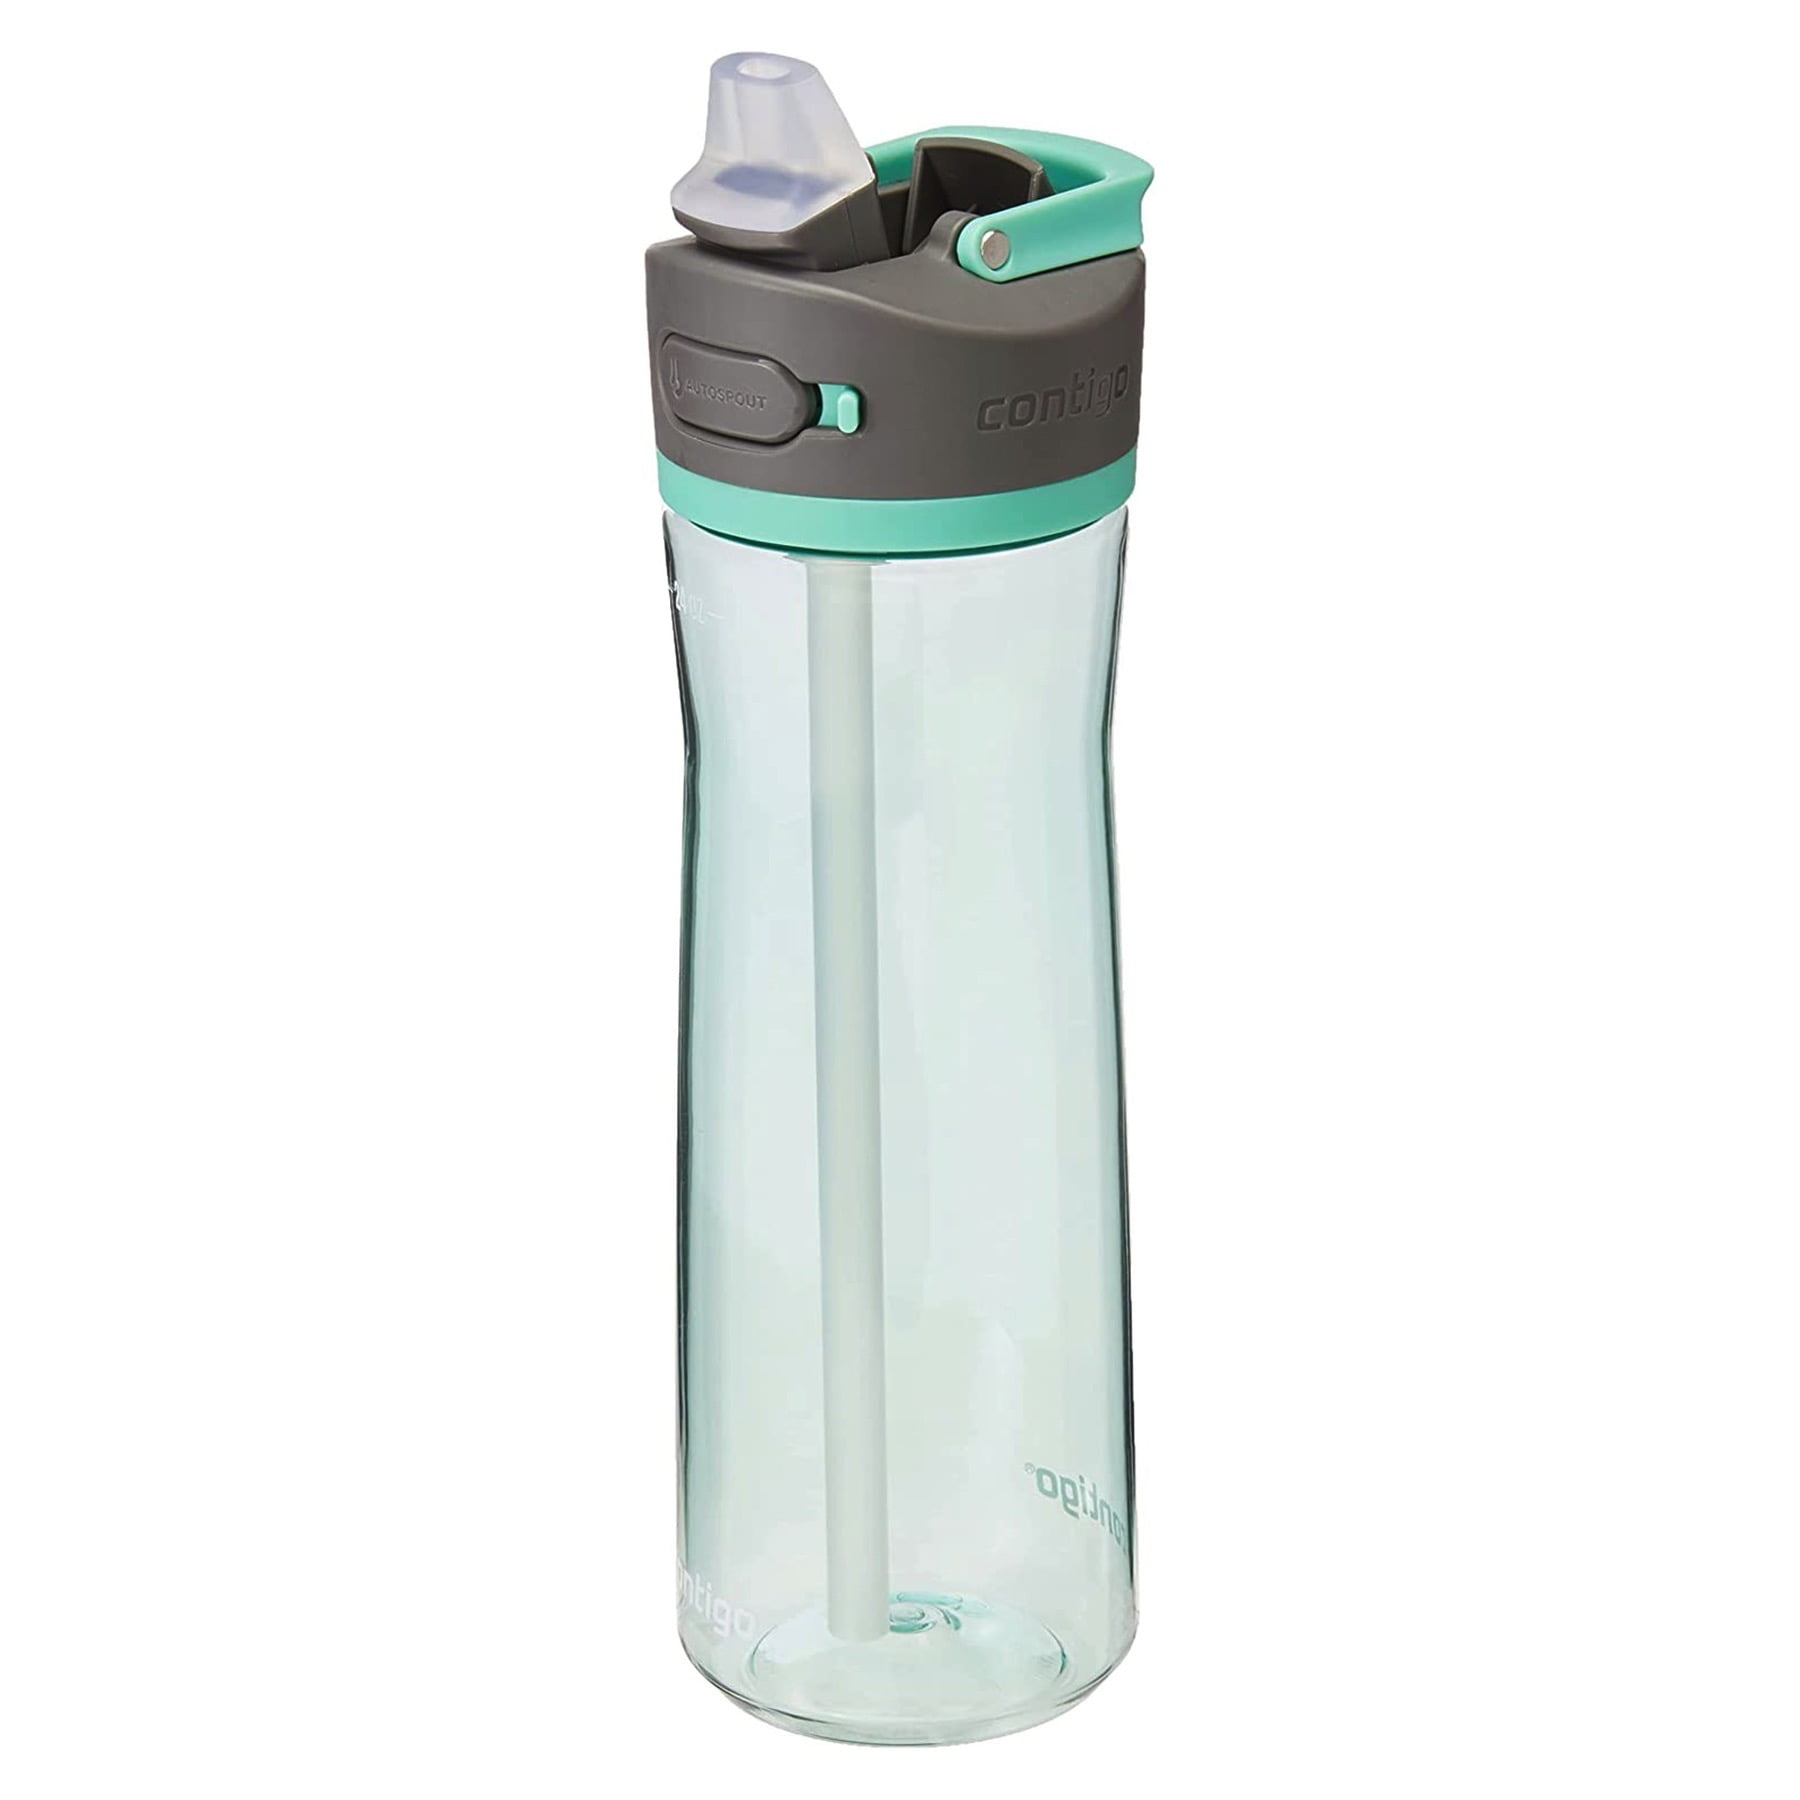  Contigo Ashland 2.0 Leak-Proof Water Bottle with Lid Lock and  Angled Straw, Dishwasher Safe Water Bottle & Cortland Spill-Proof Water  Bottle, BPA-Free Plastic Water Bottle : Sports & Outdoors